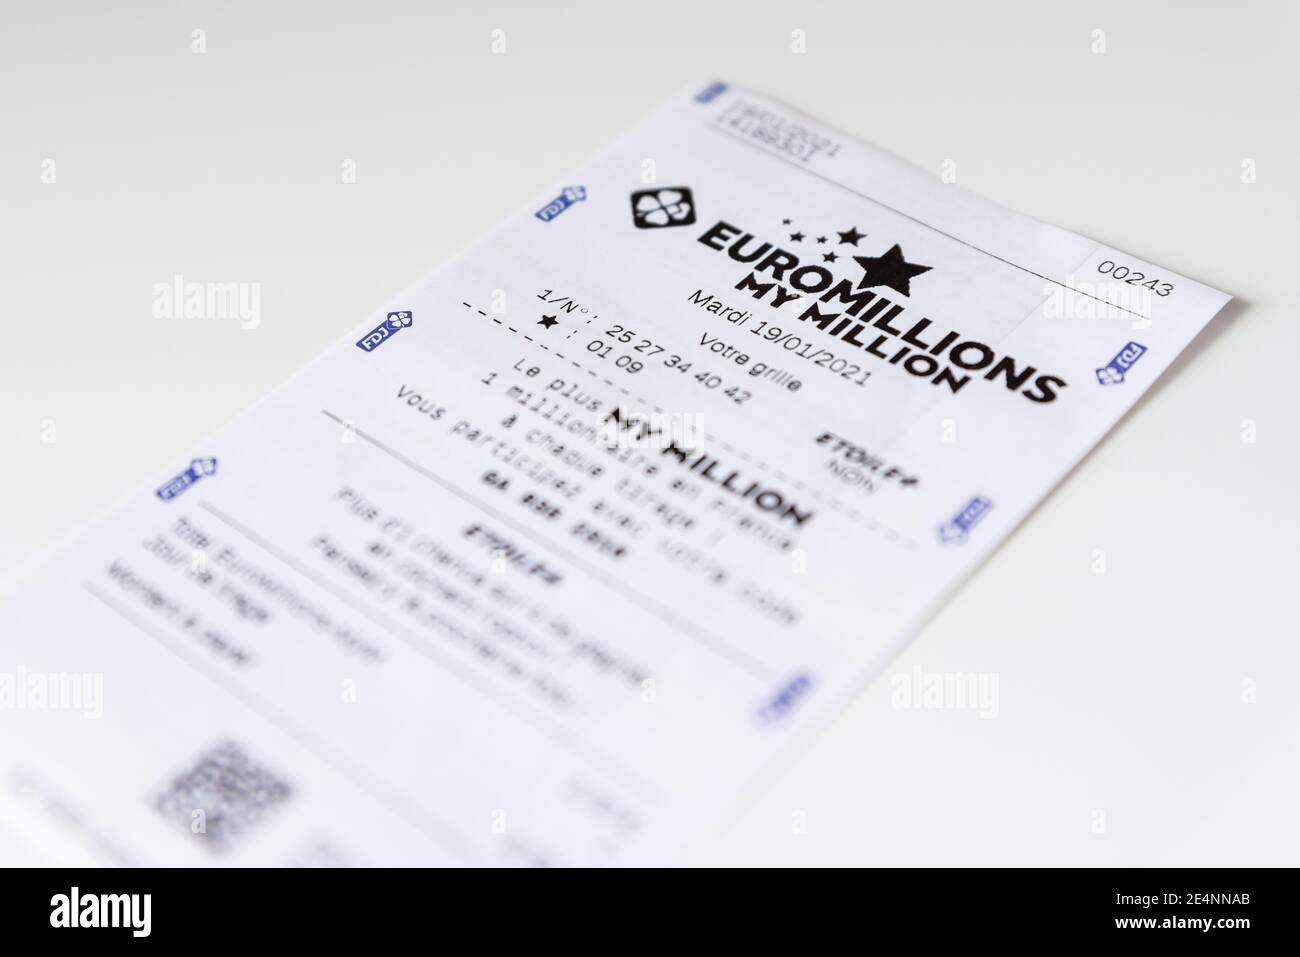 Francaise des Jeux Euromillions receipt on white background. EuroMillions is a European transnational lottery, it was launched in 2004. Stock Photo